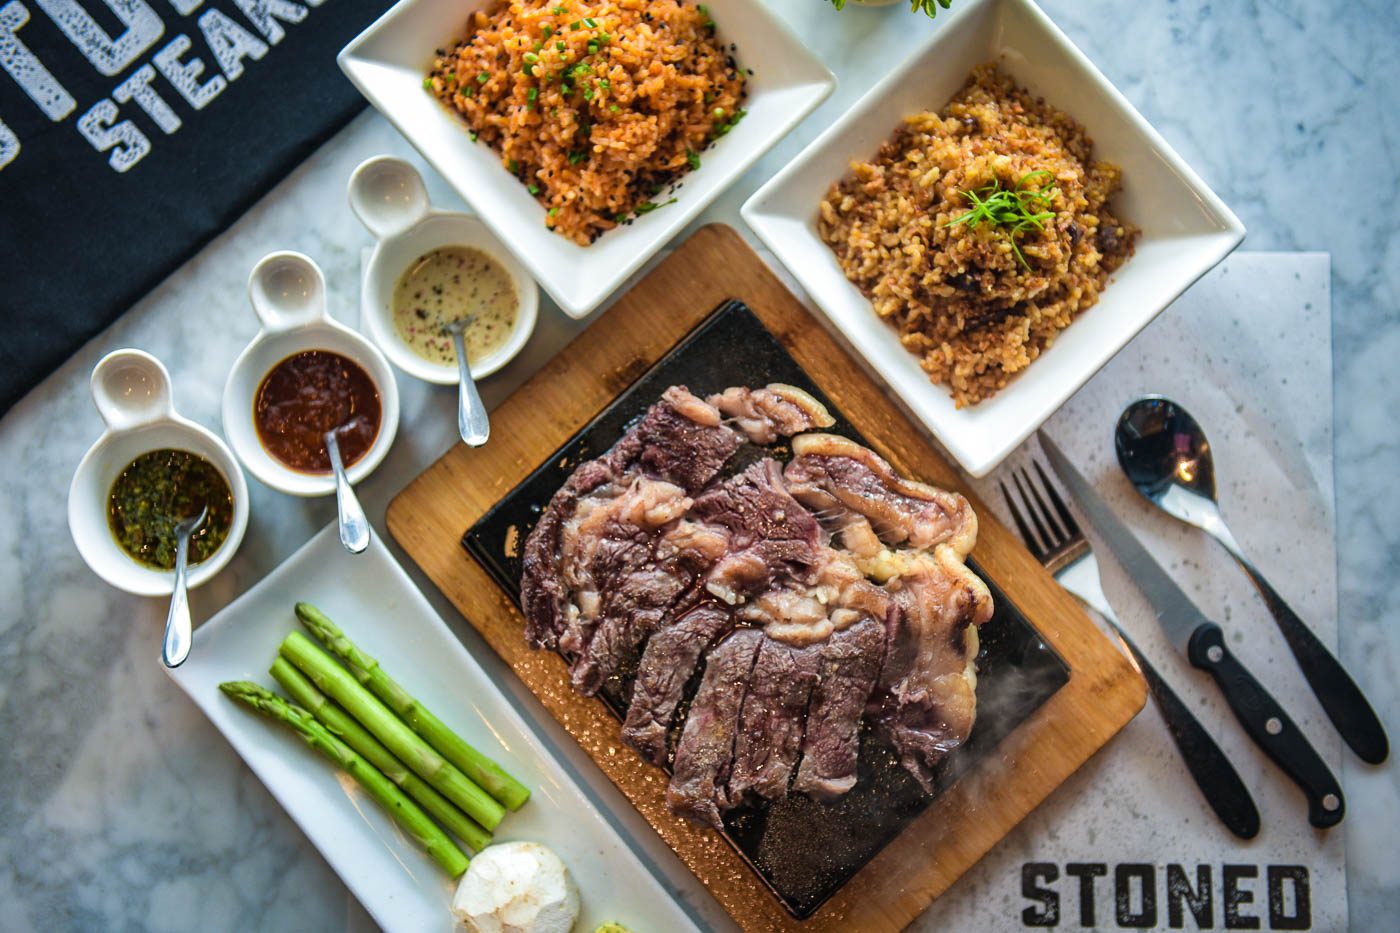 Rappler Eats: Stoned Steaks is more than just its gimmicks